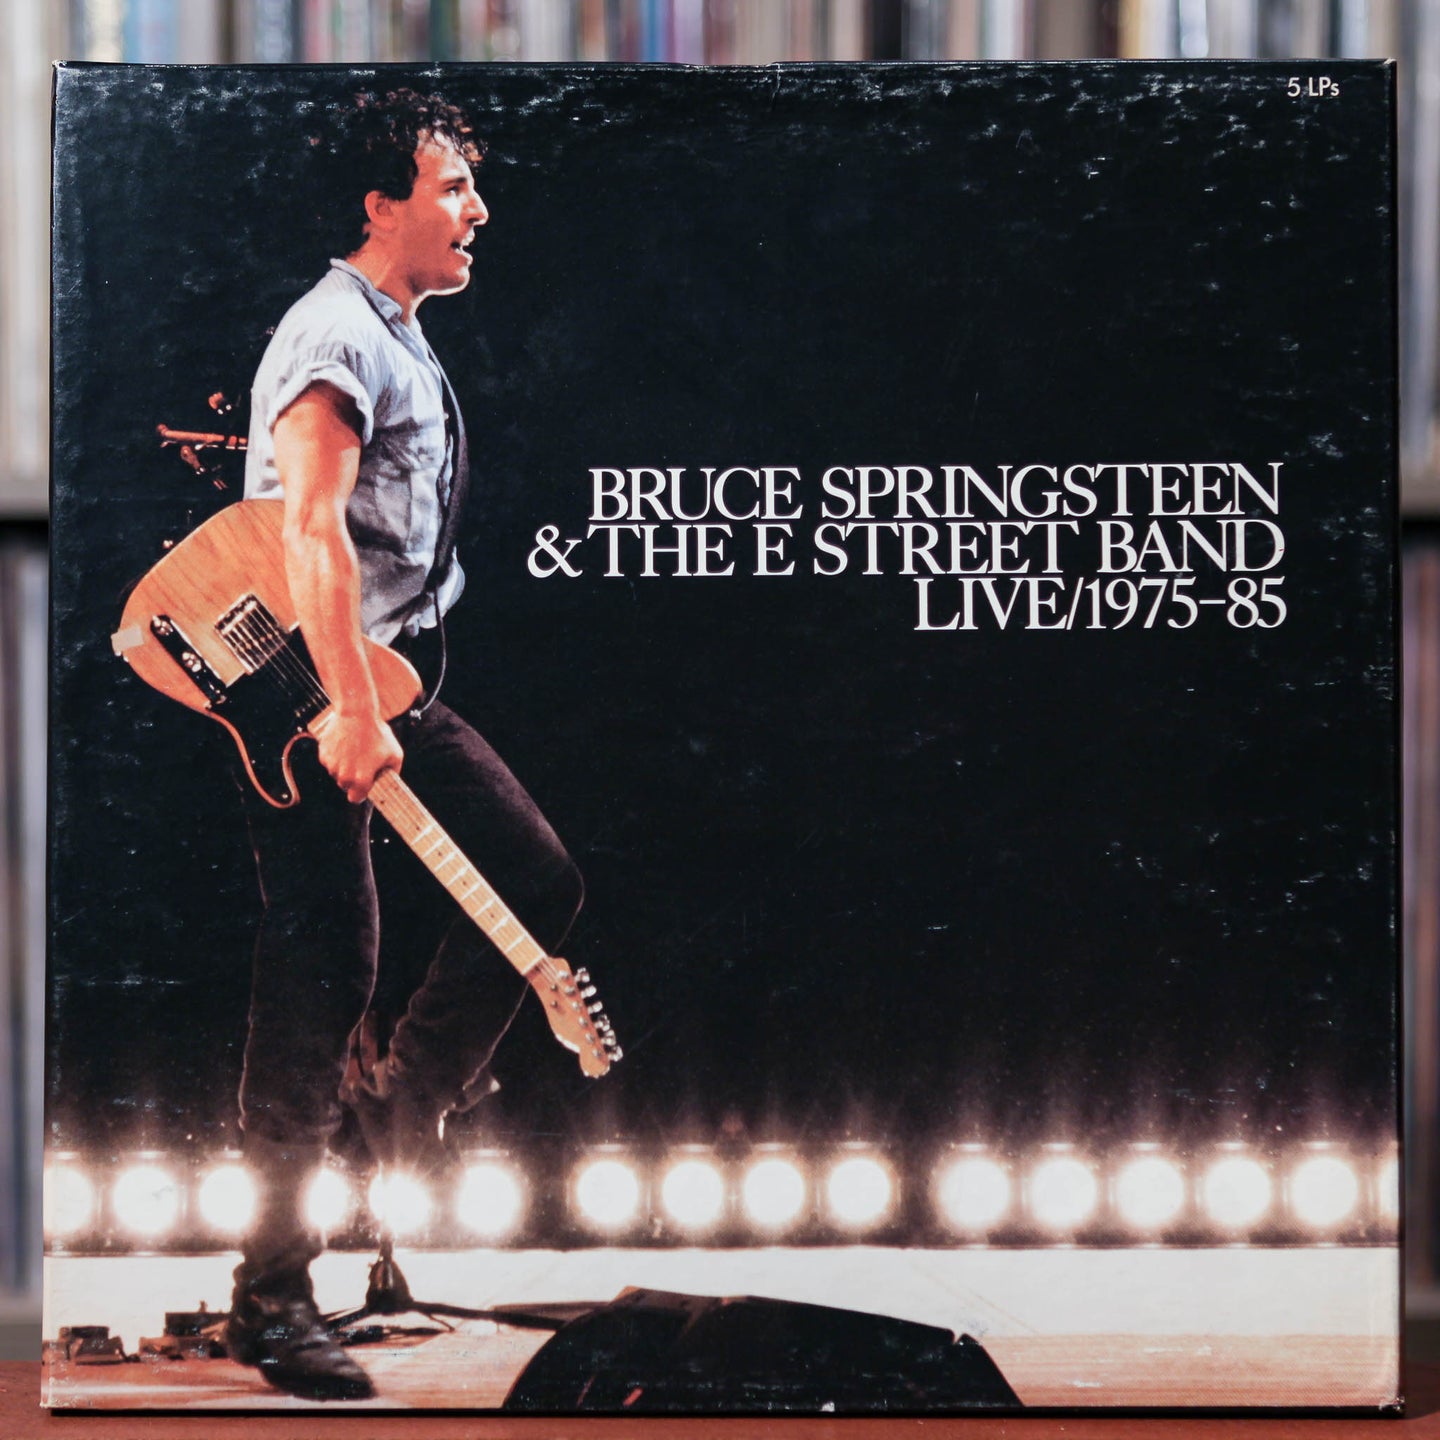 Bruce Springsteen & The E Street Band - 5LP LIVE/1975-85 - 1986 Columbia, VG+/EX